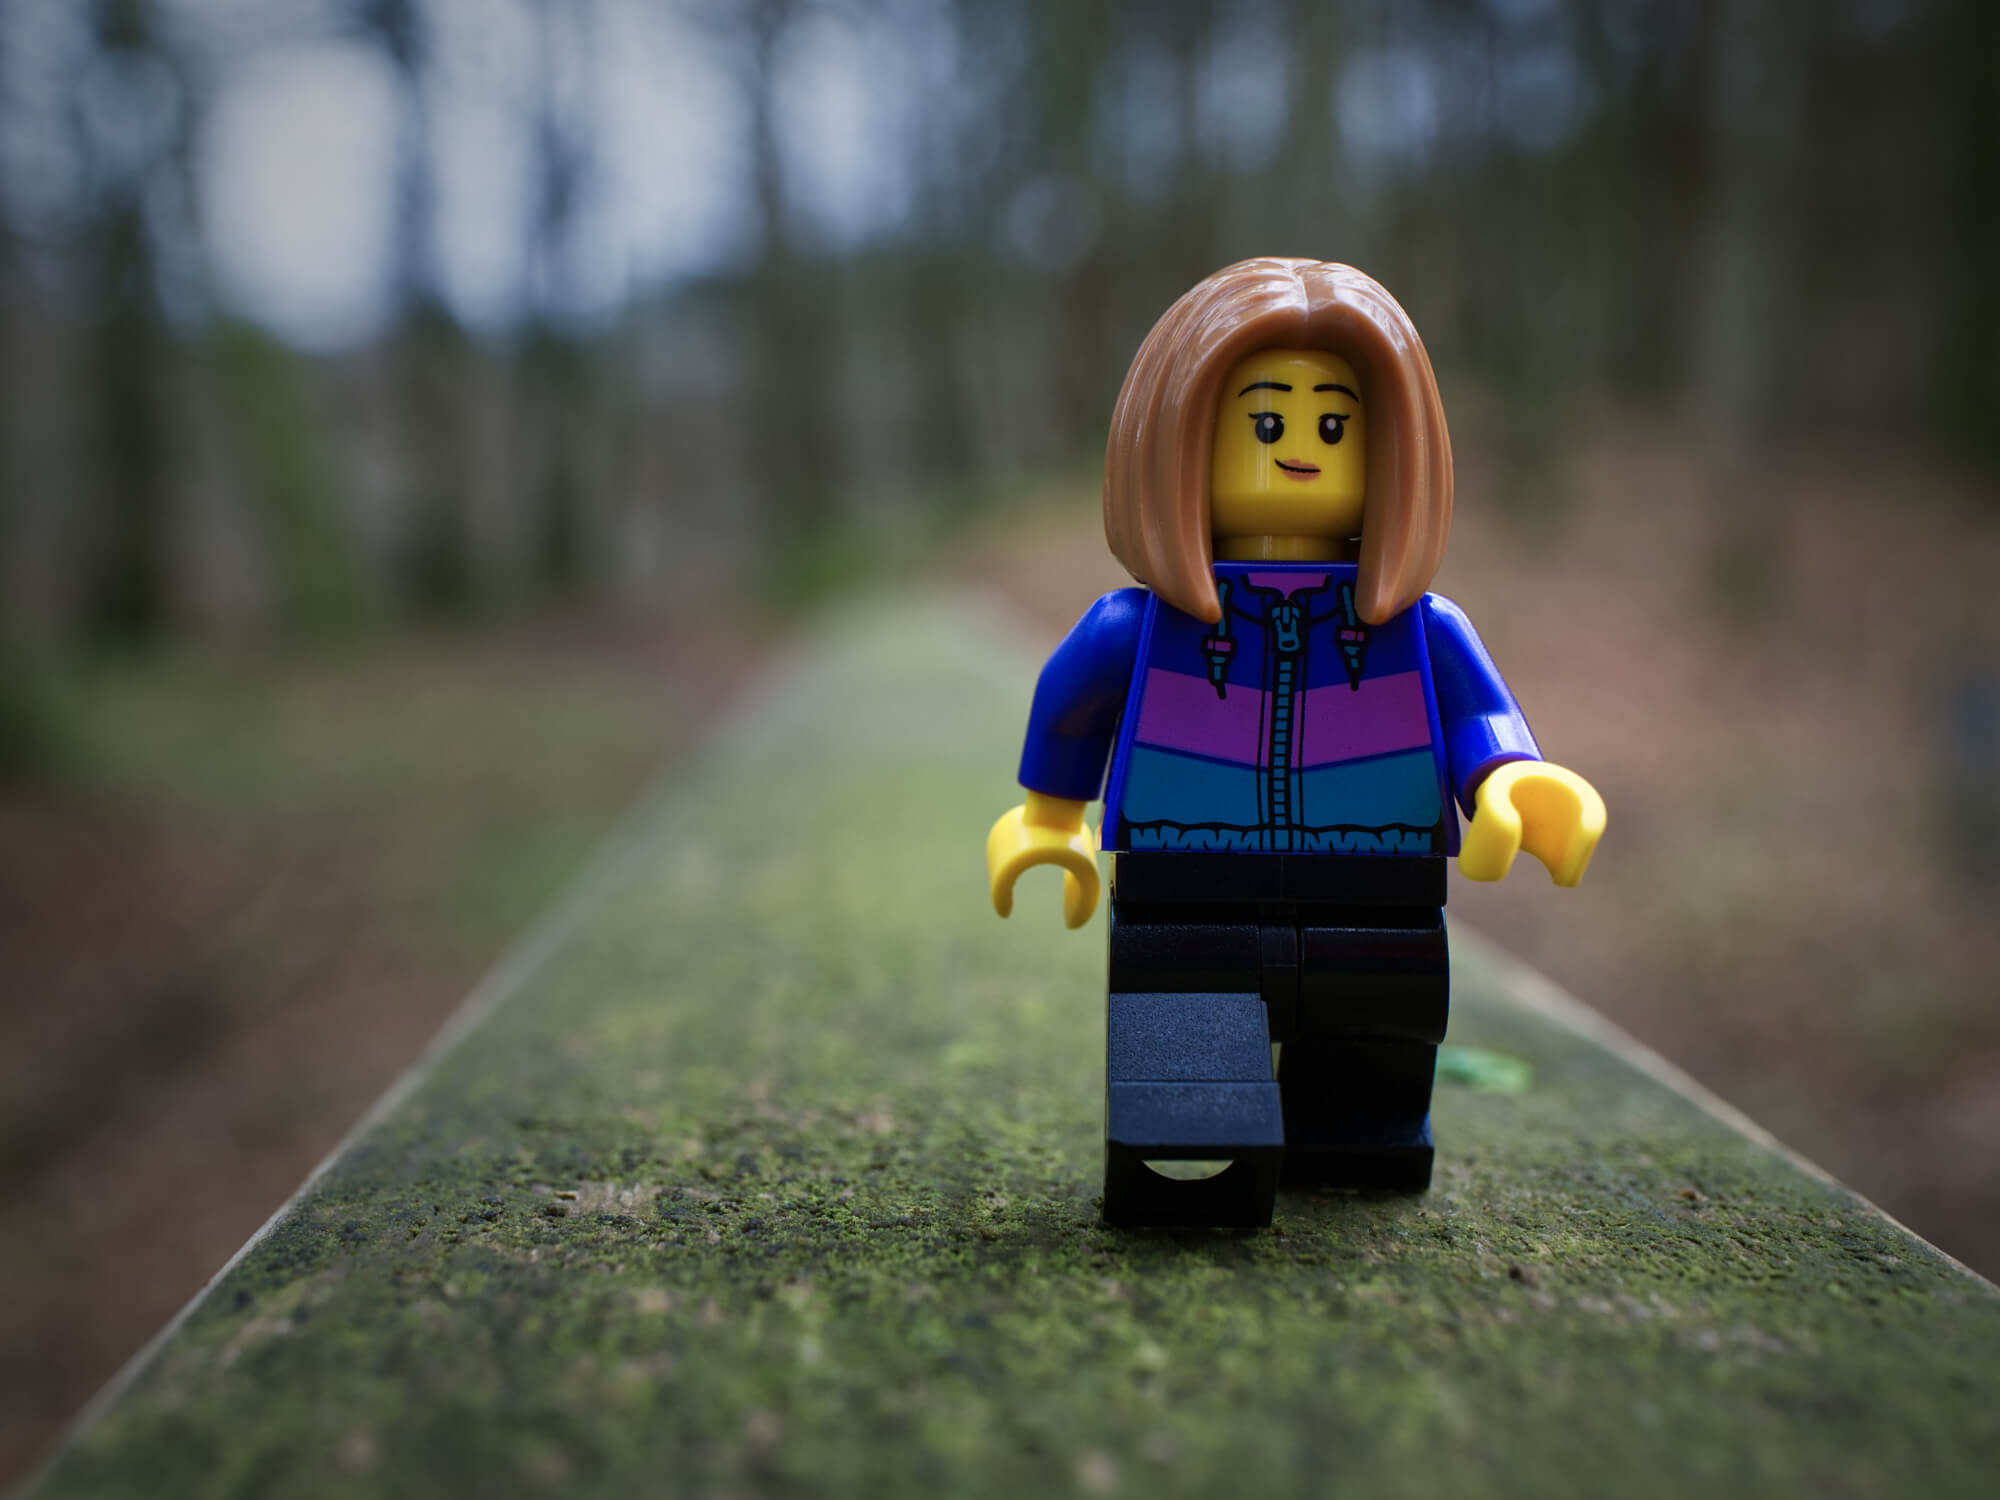 A Lego minifgure walks along a mossy path in a nature scene, with out of focus trees in the background.